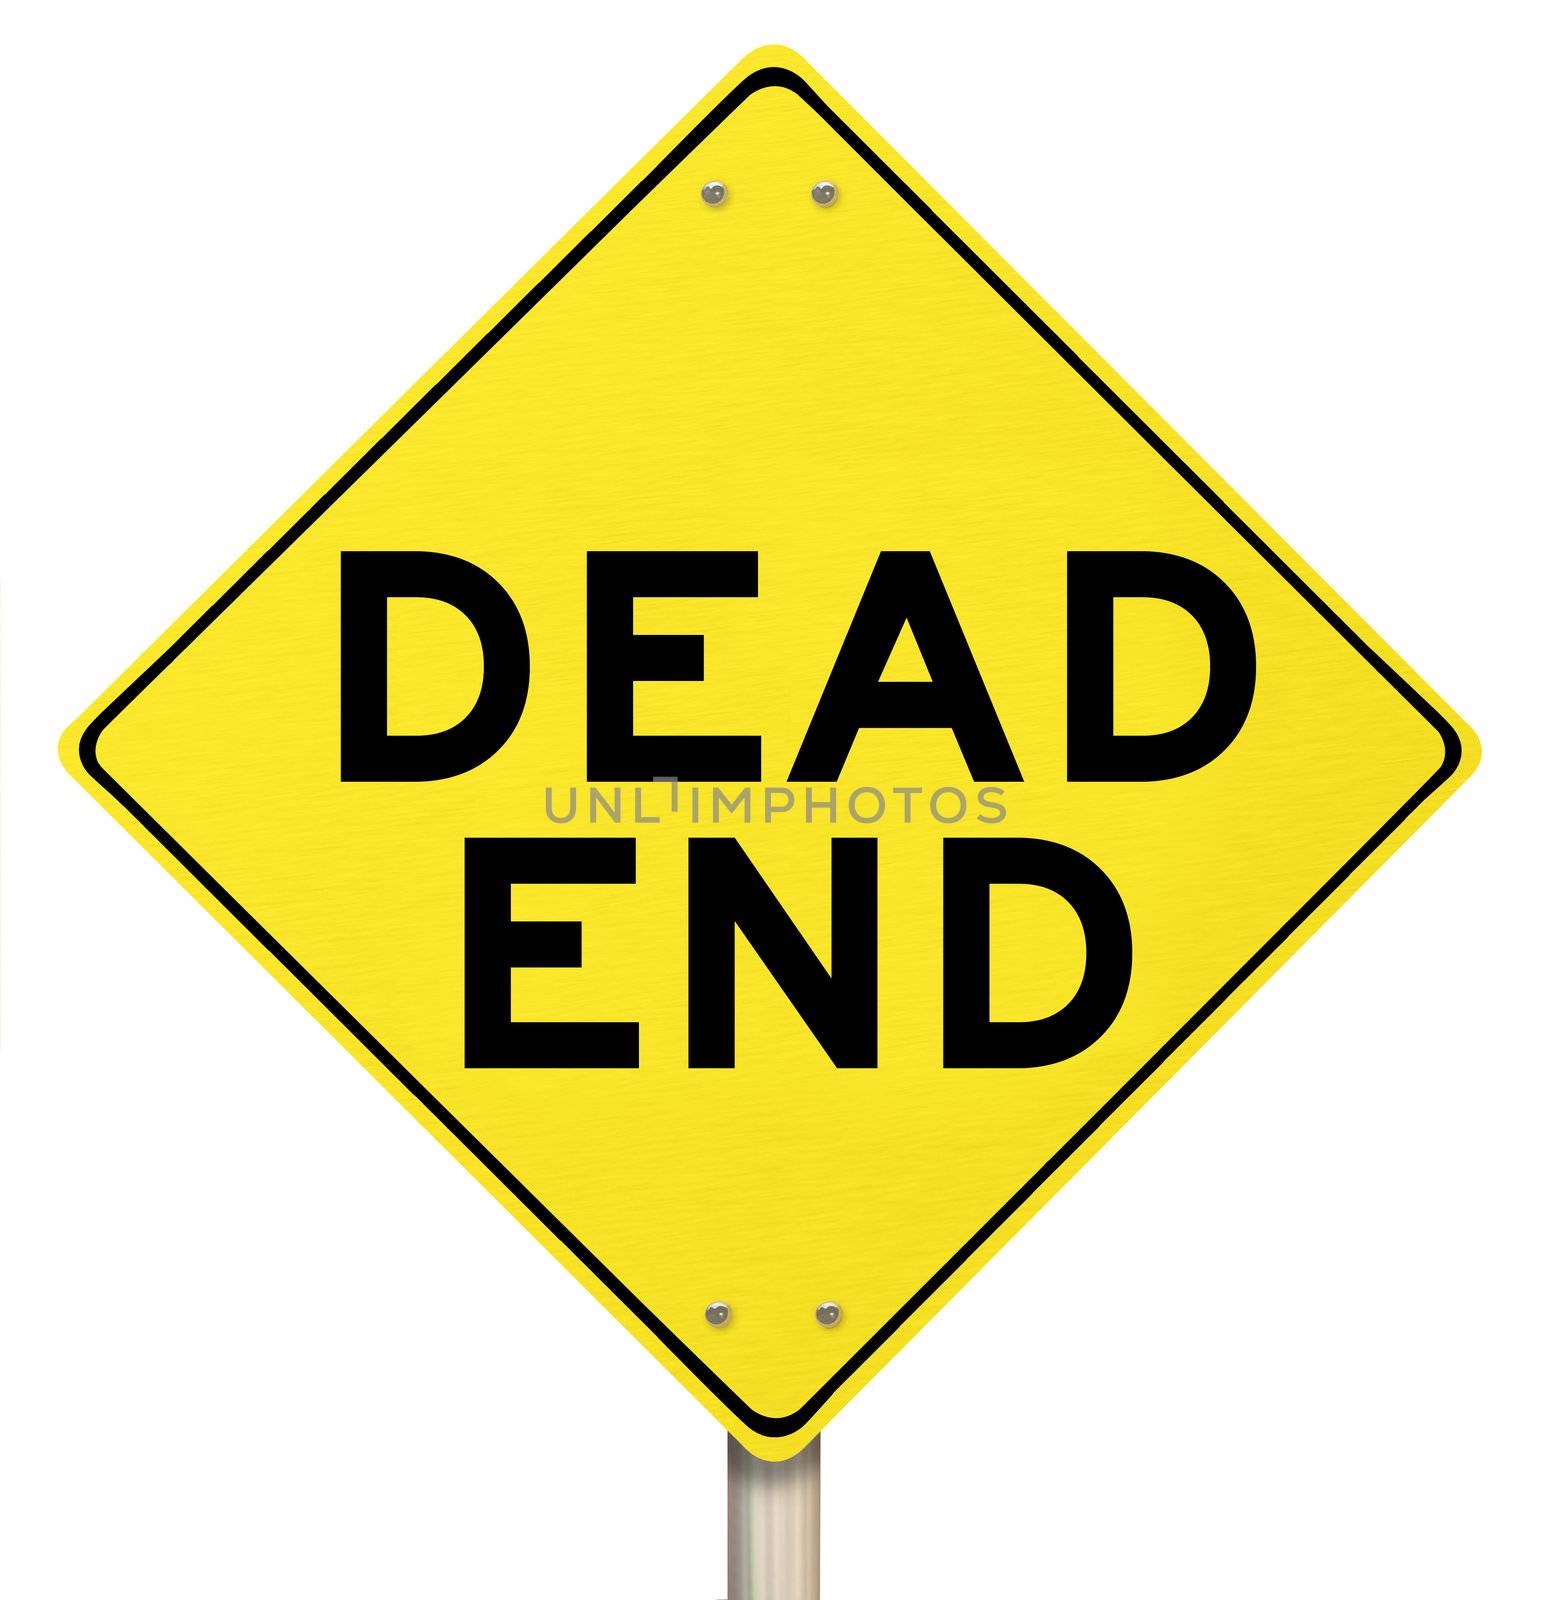 Dead End Yellow Warning Road Sign Closed No Exit by iQoncept